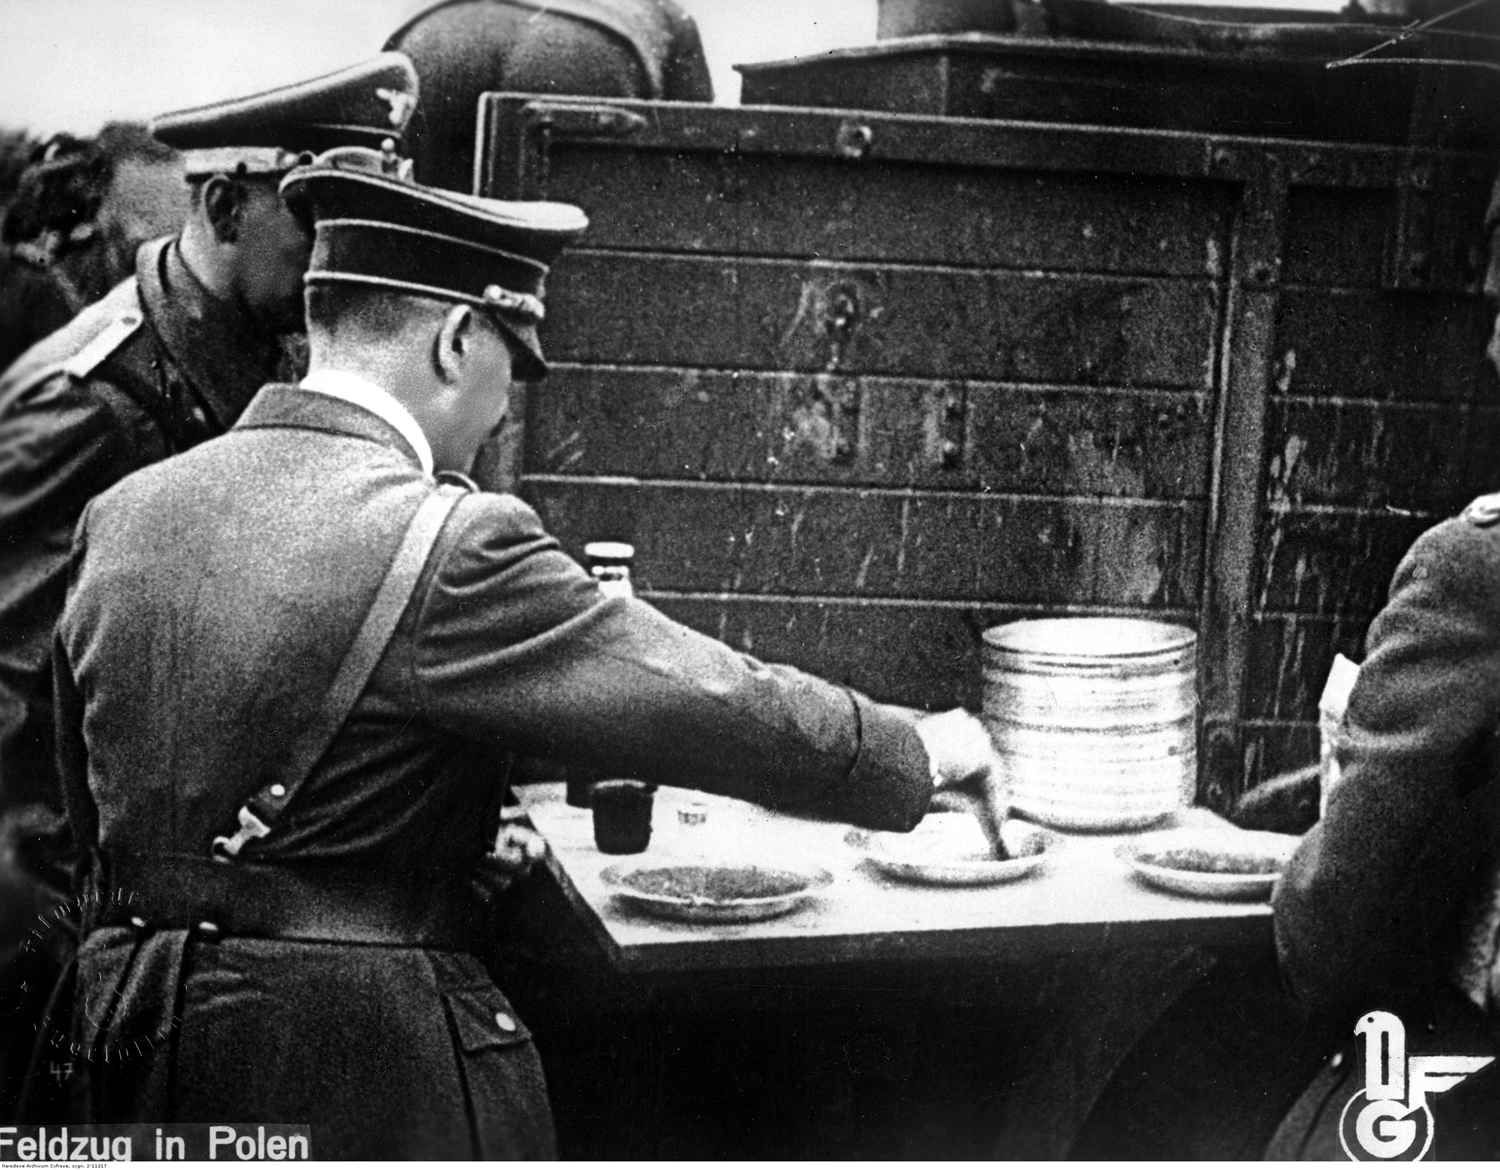 Adolf Hitler taking a lunch break at the field kitchen near the front line in Poland